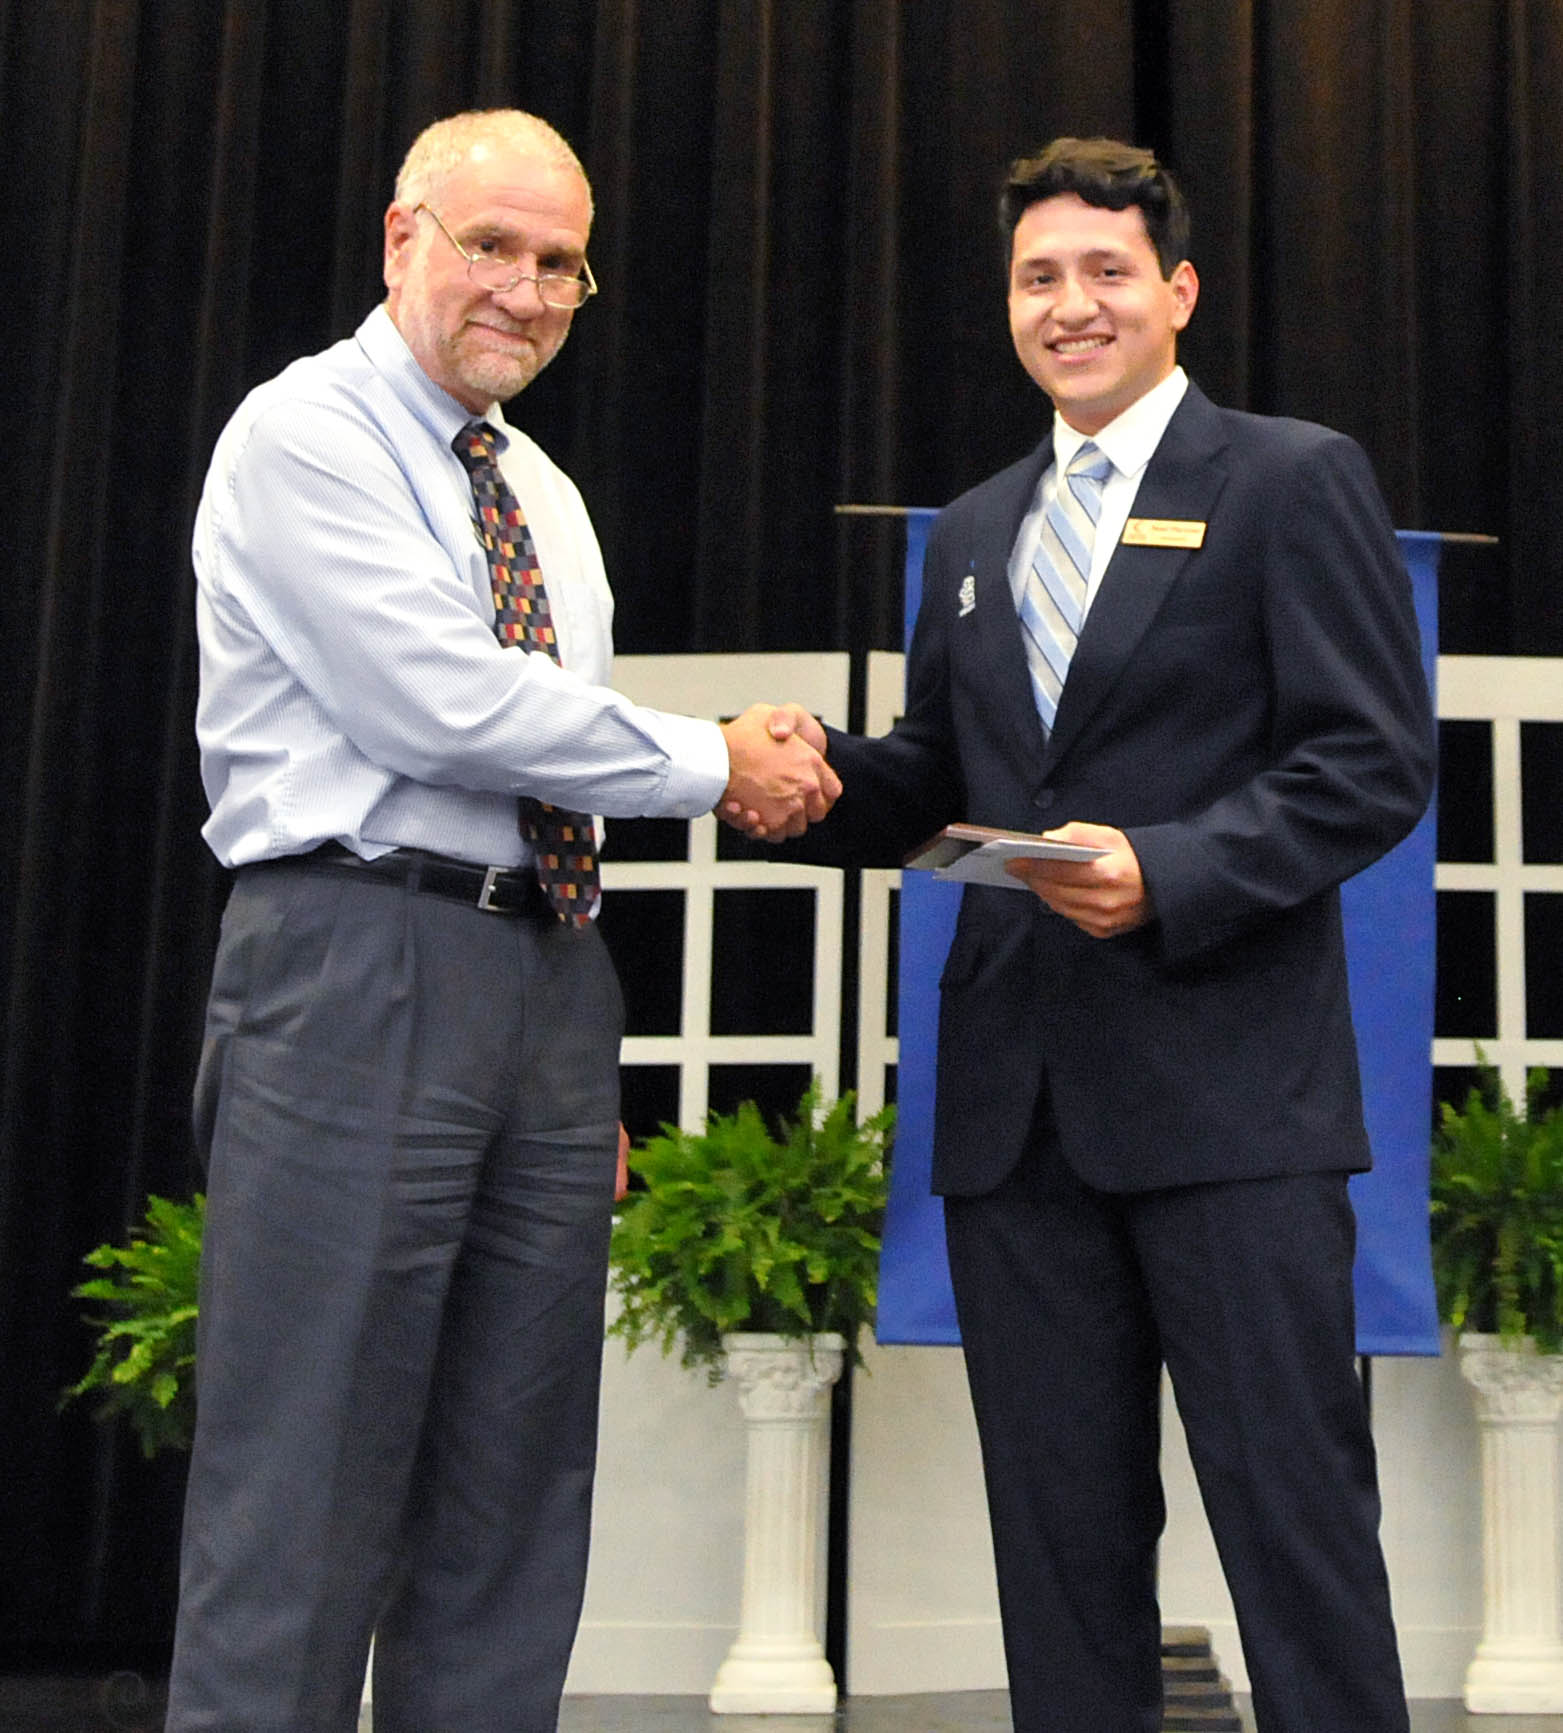 Excellence honored at CCCC awards program